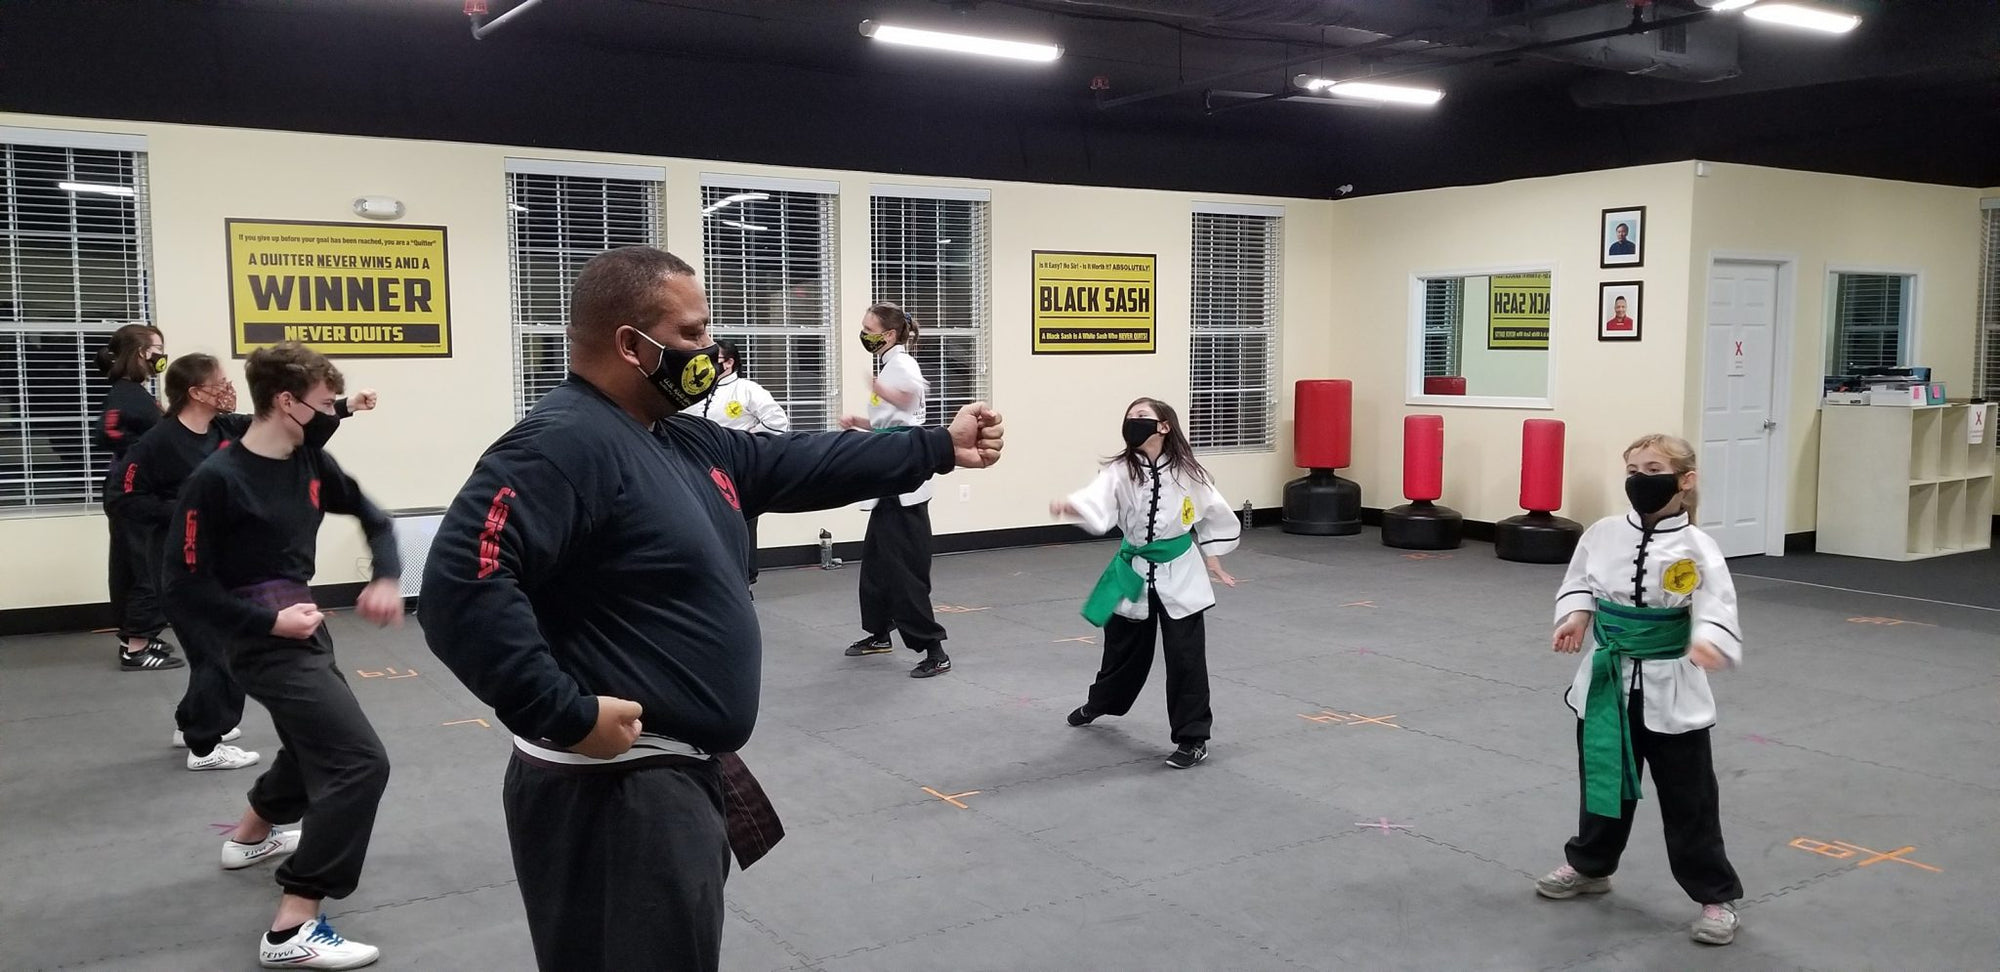 WHY MARTIAL ARTS IS A GREAT METHOD FOR REDUCING AGGRESSION